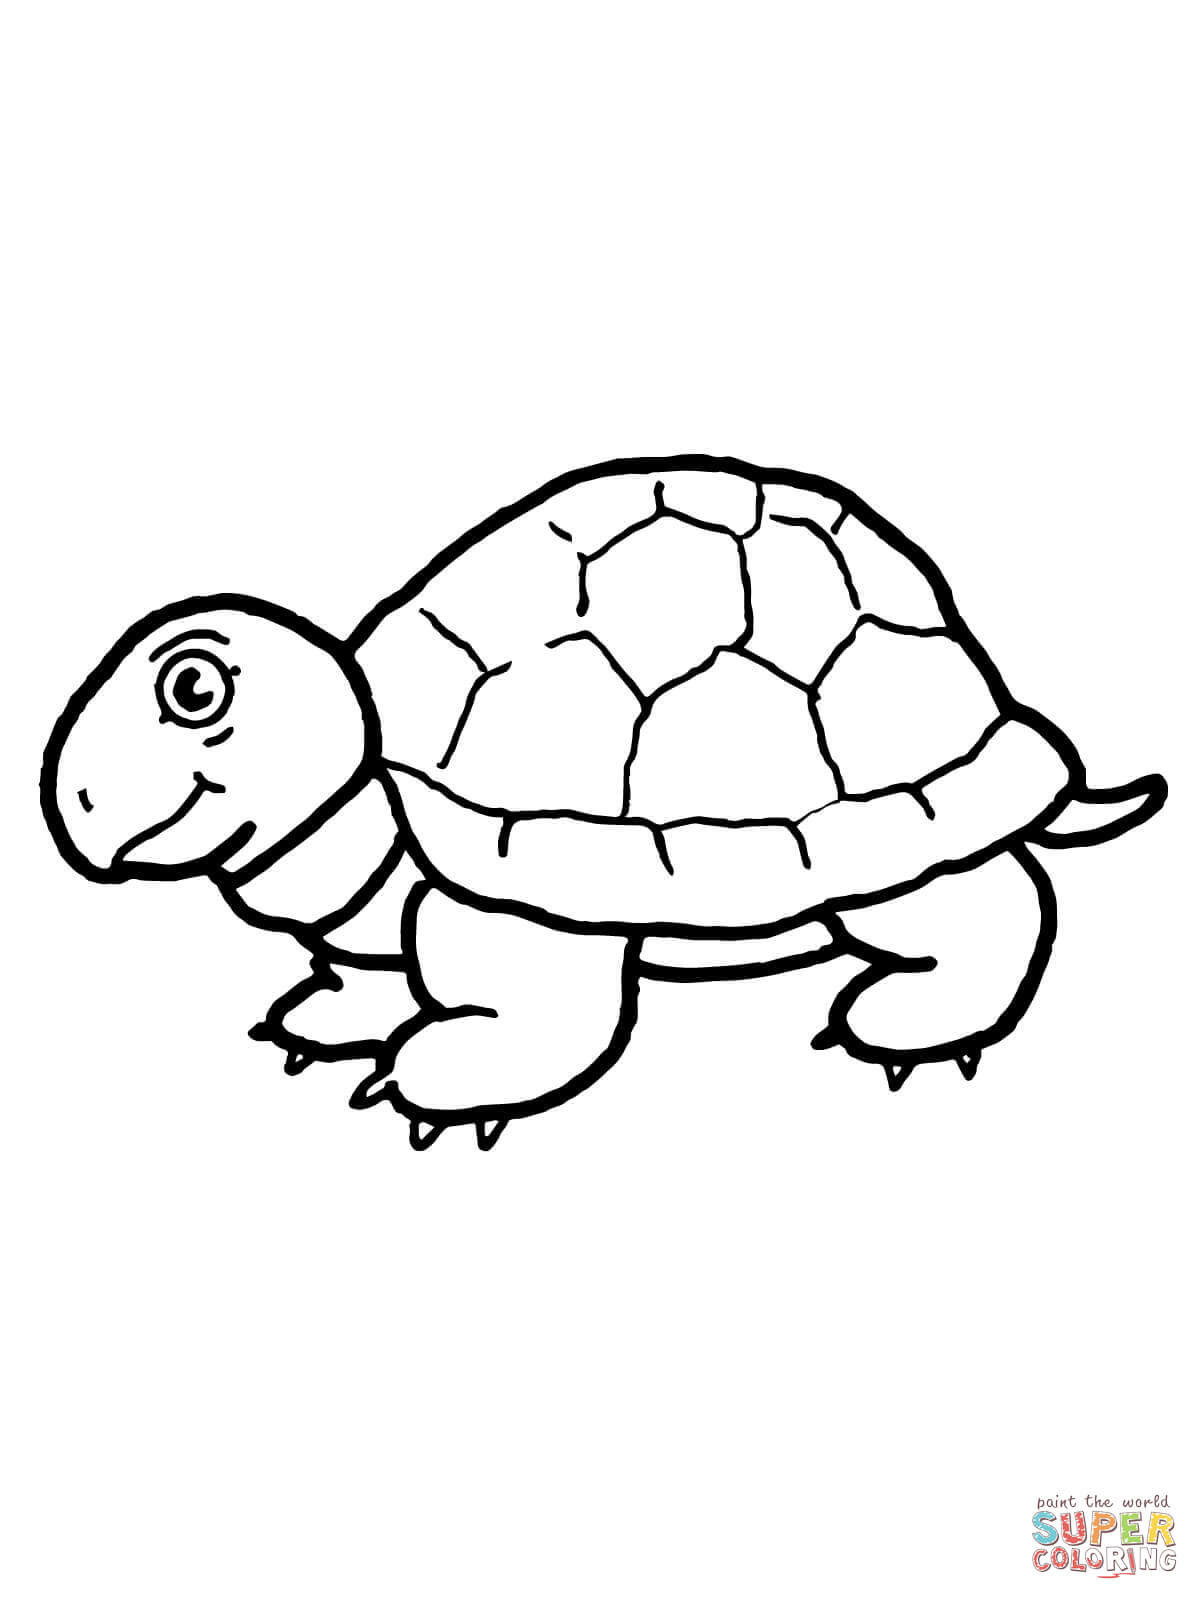 Free printable tortoise coloring pages for kids! Tortoise Coloring Pages Free Coloring Pages